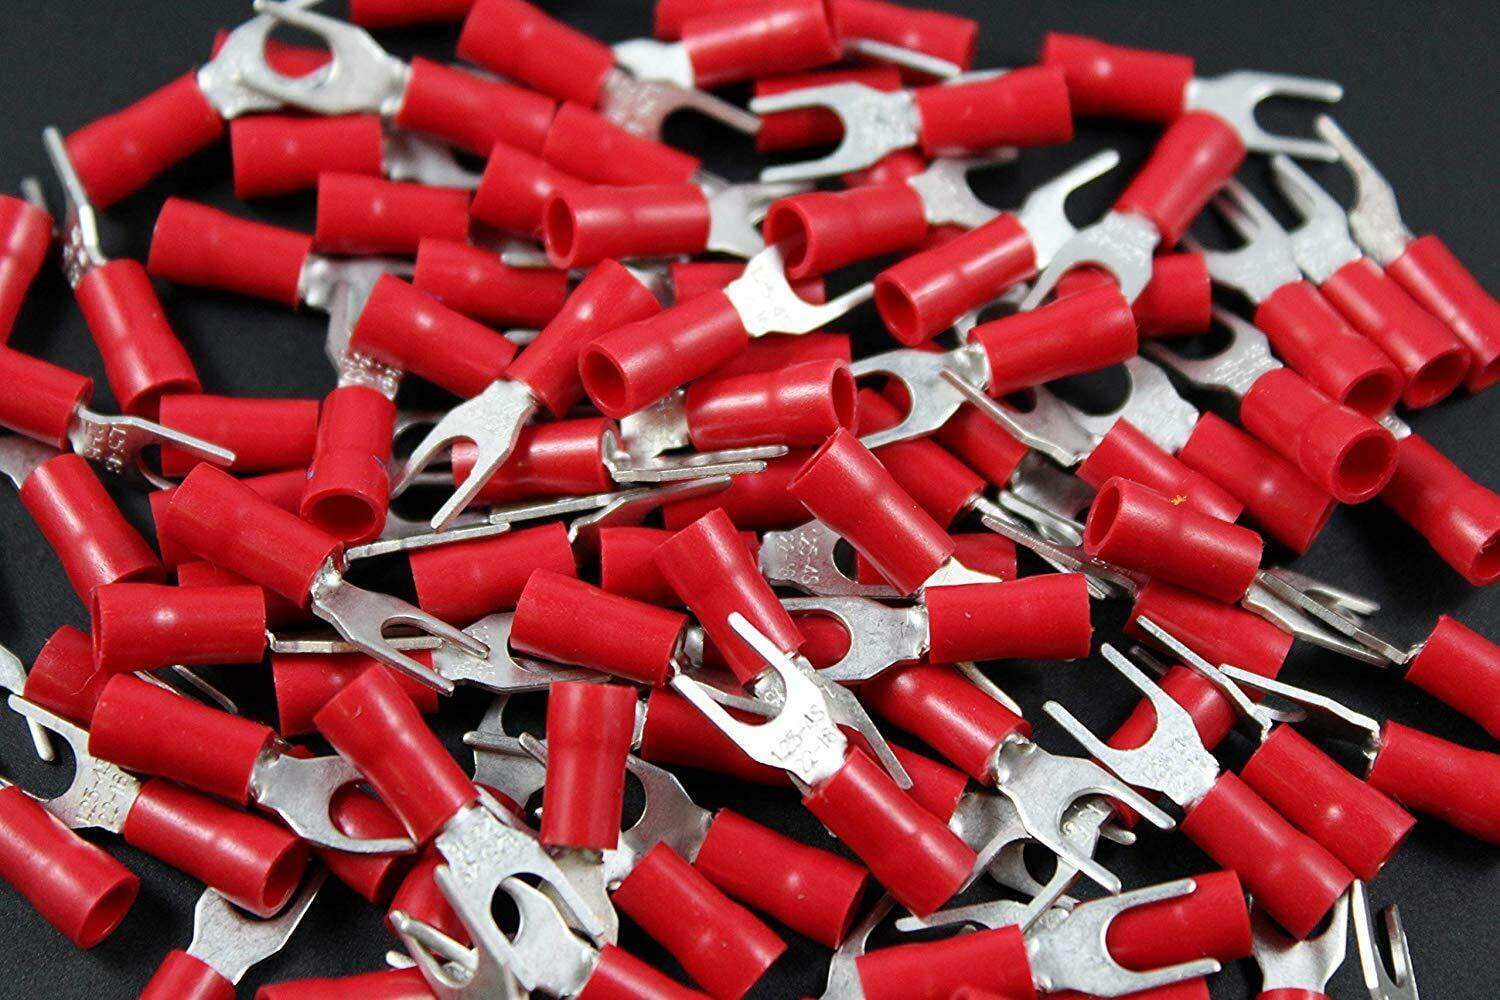 SHIPS FREE TODAY! 100 PACK RED 22-18 GAUGE AWG SPADE FORK WIRE CONNECTORS #8 